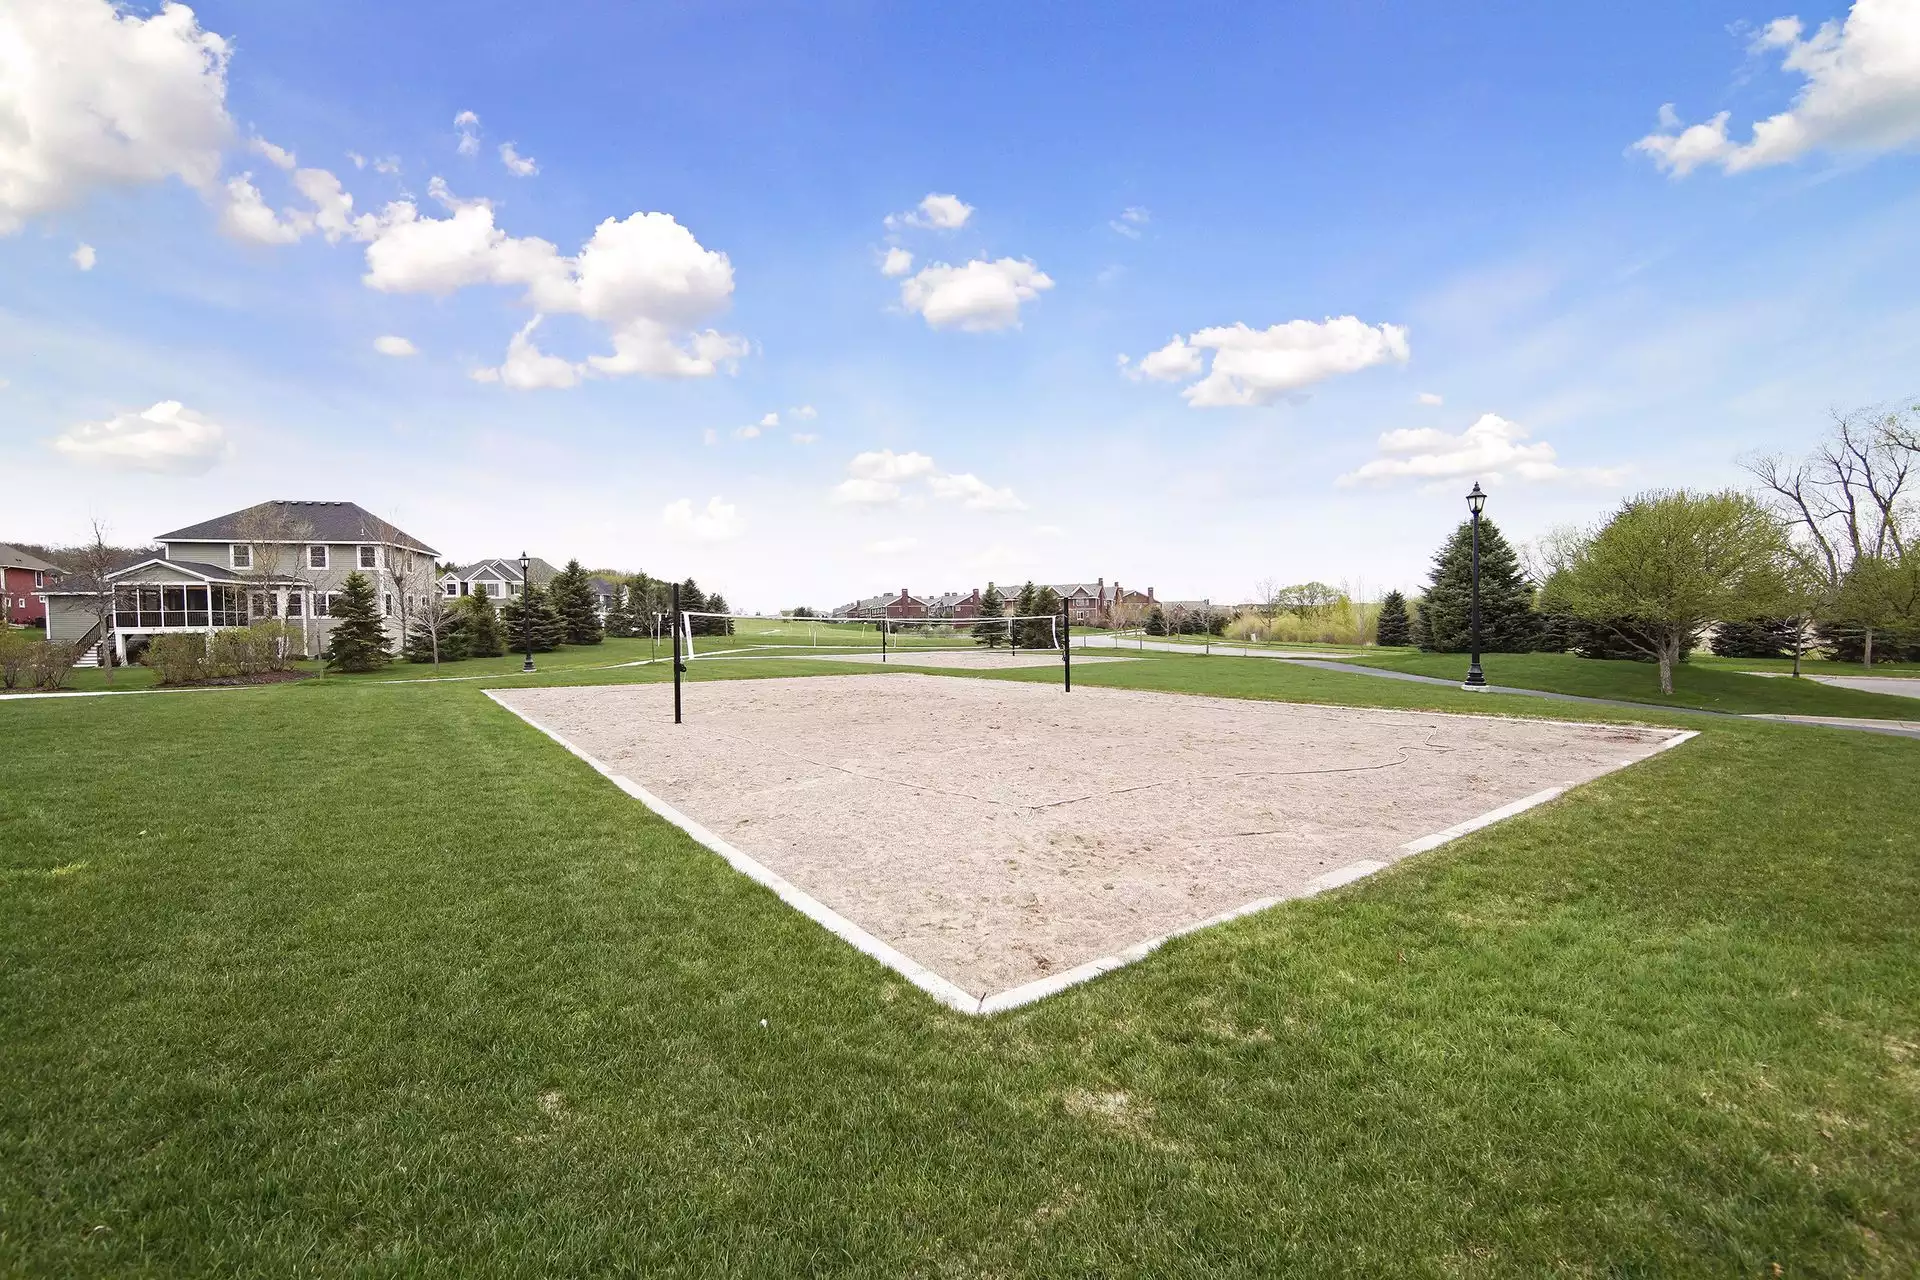 Woodbury Home For Sale Dancing Volleyball Pit